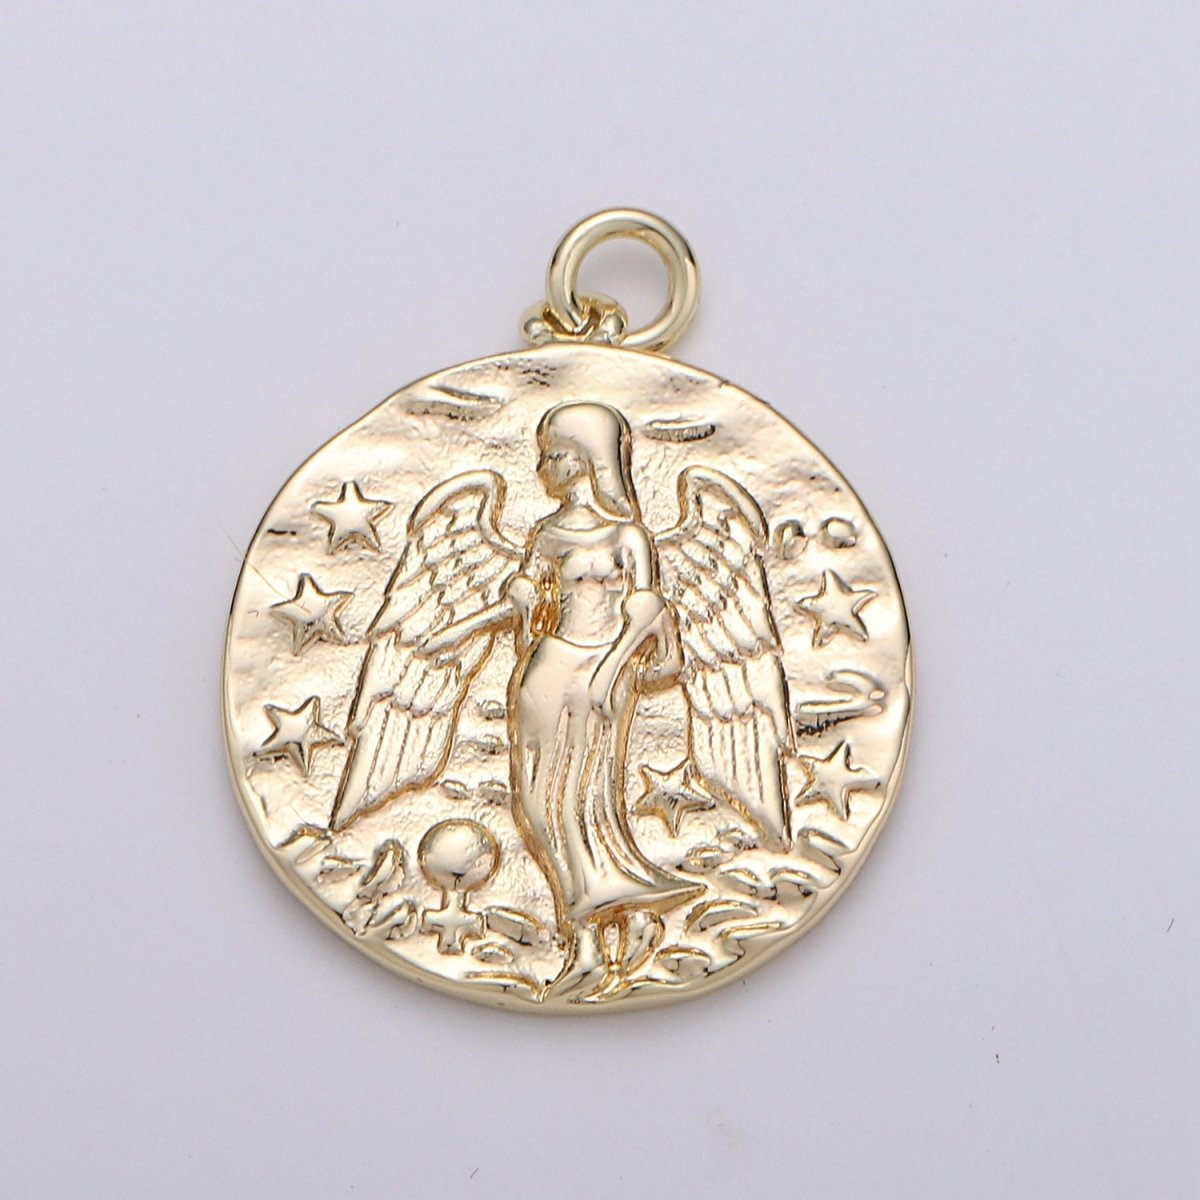 Rustic Coin Charm 14k Gold Filled coin pendant, Medallion charms Angel coin charms, Vintage Disc Charm for Necklace Bracelet Earring D-391 - DLUXCA